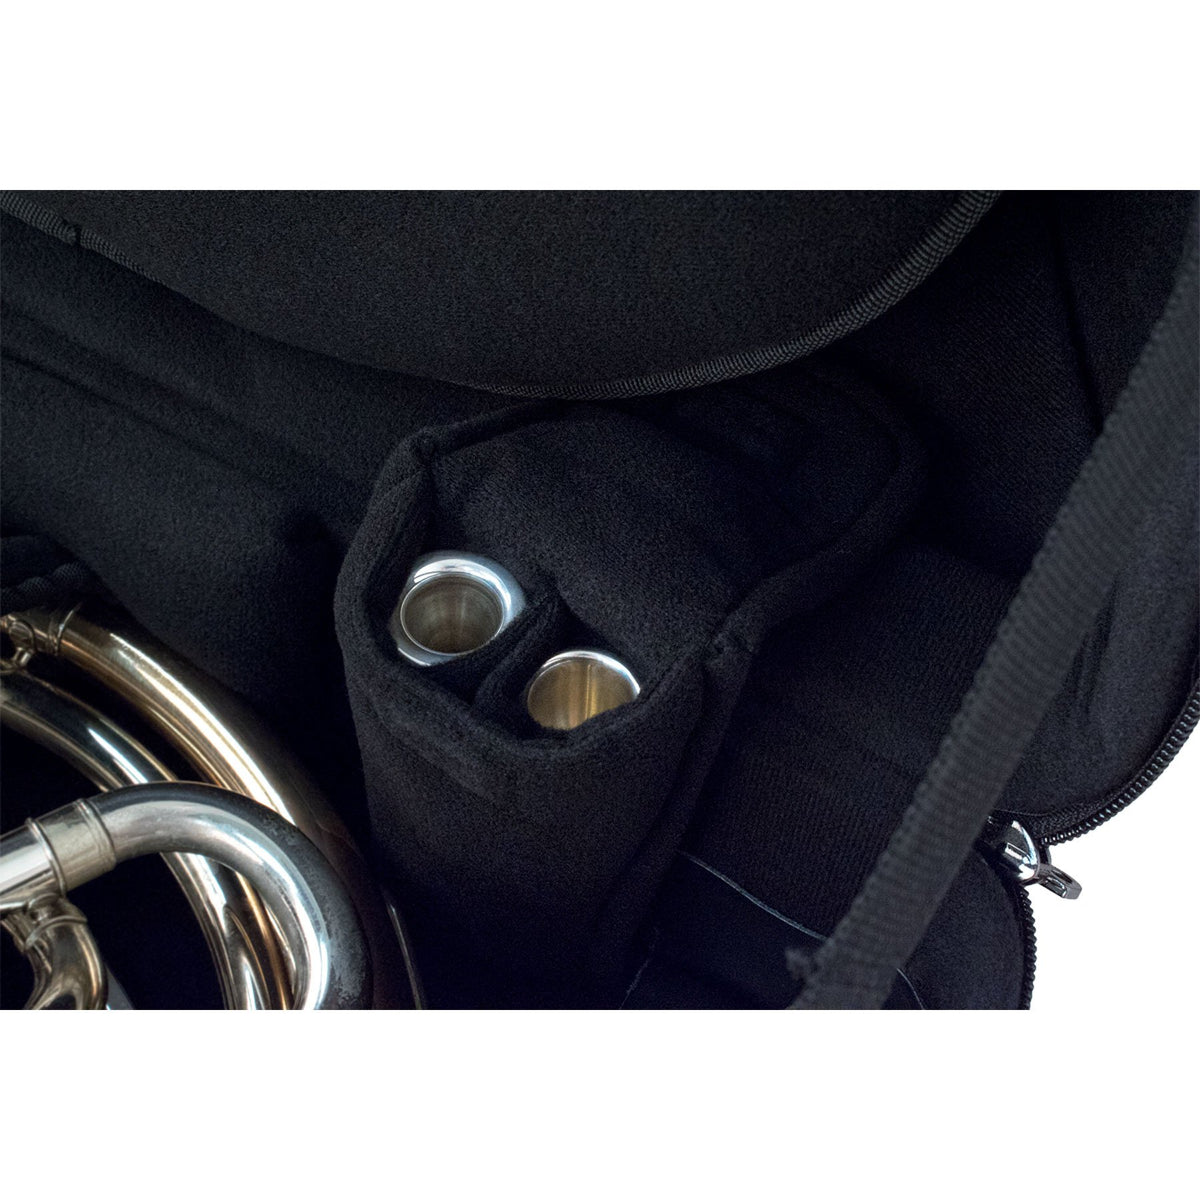 Protec - French Horn Screw Bell IPAC Case (Compact)-Case-Protec-Music Elements